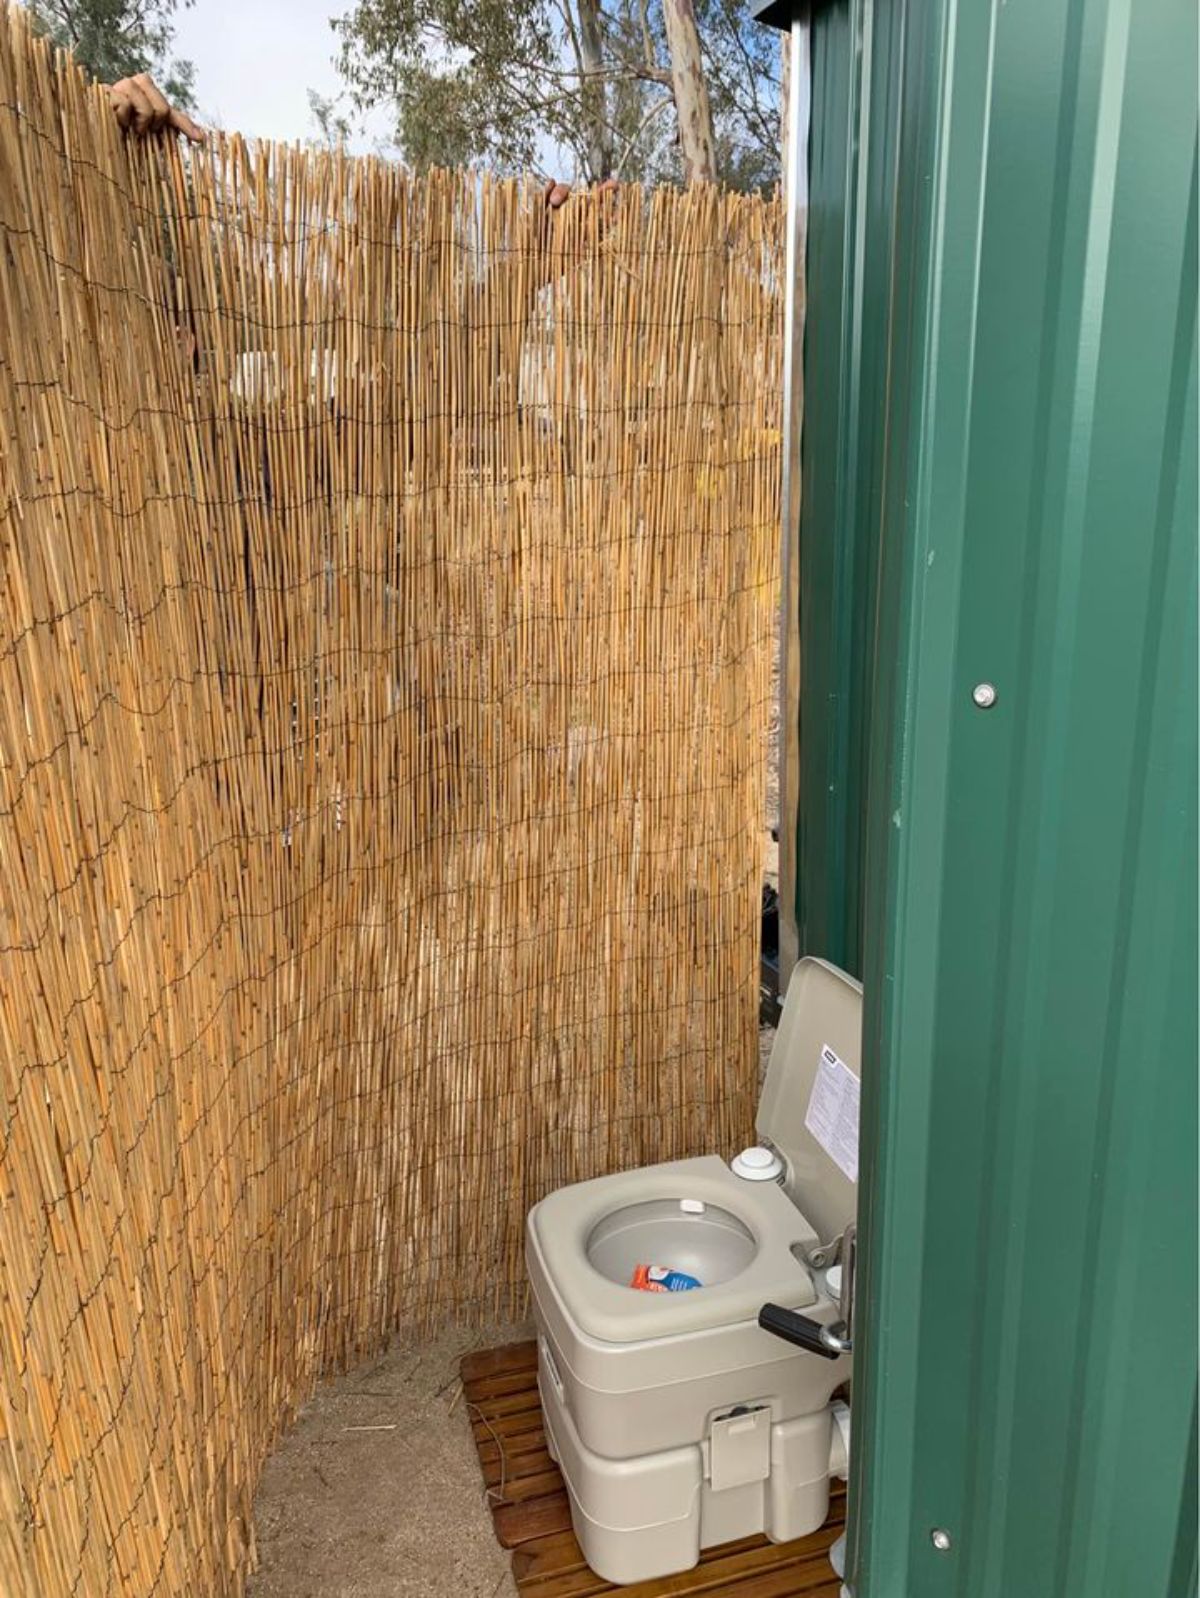 Compost toilet outside the trailer built tiny house